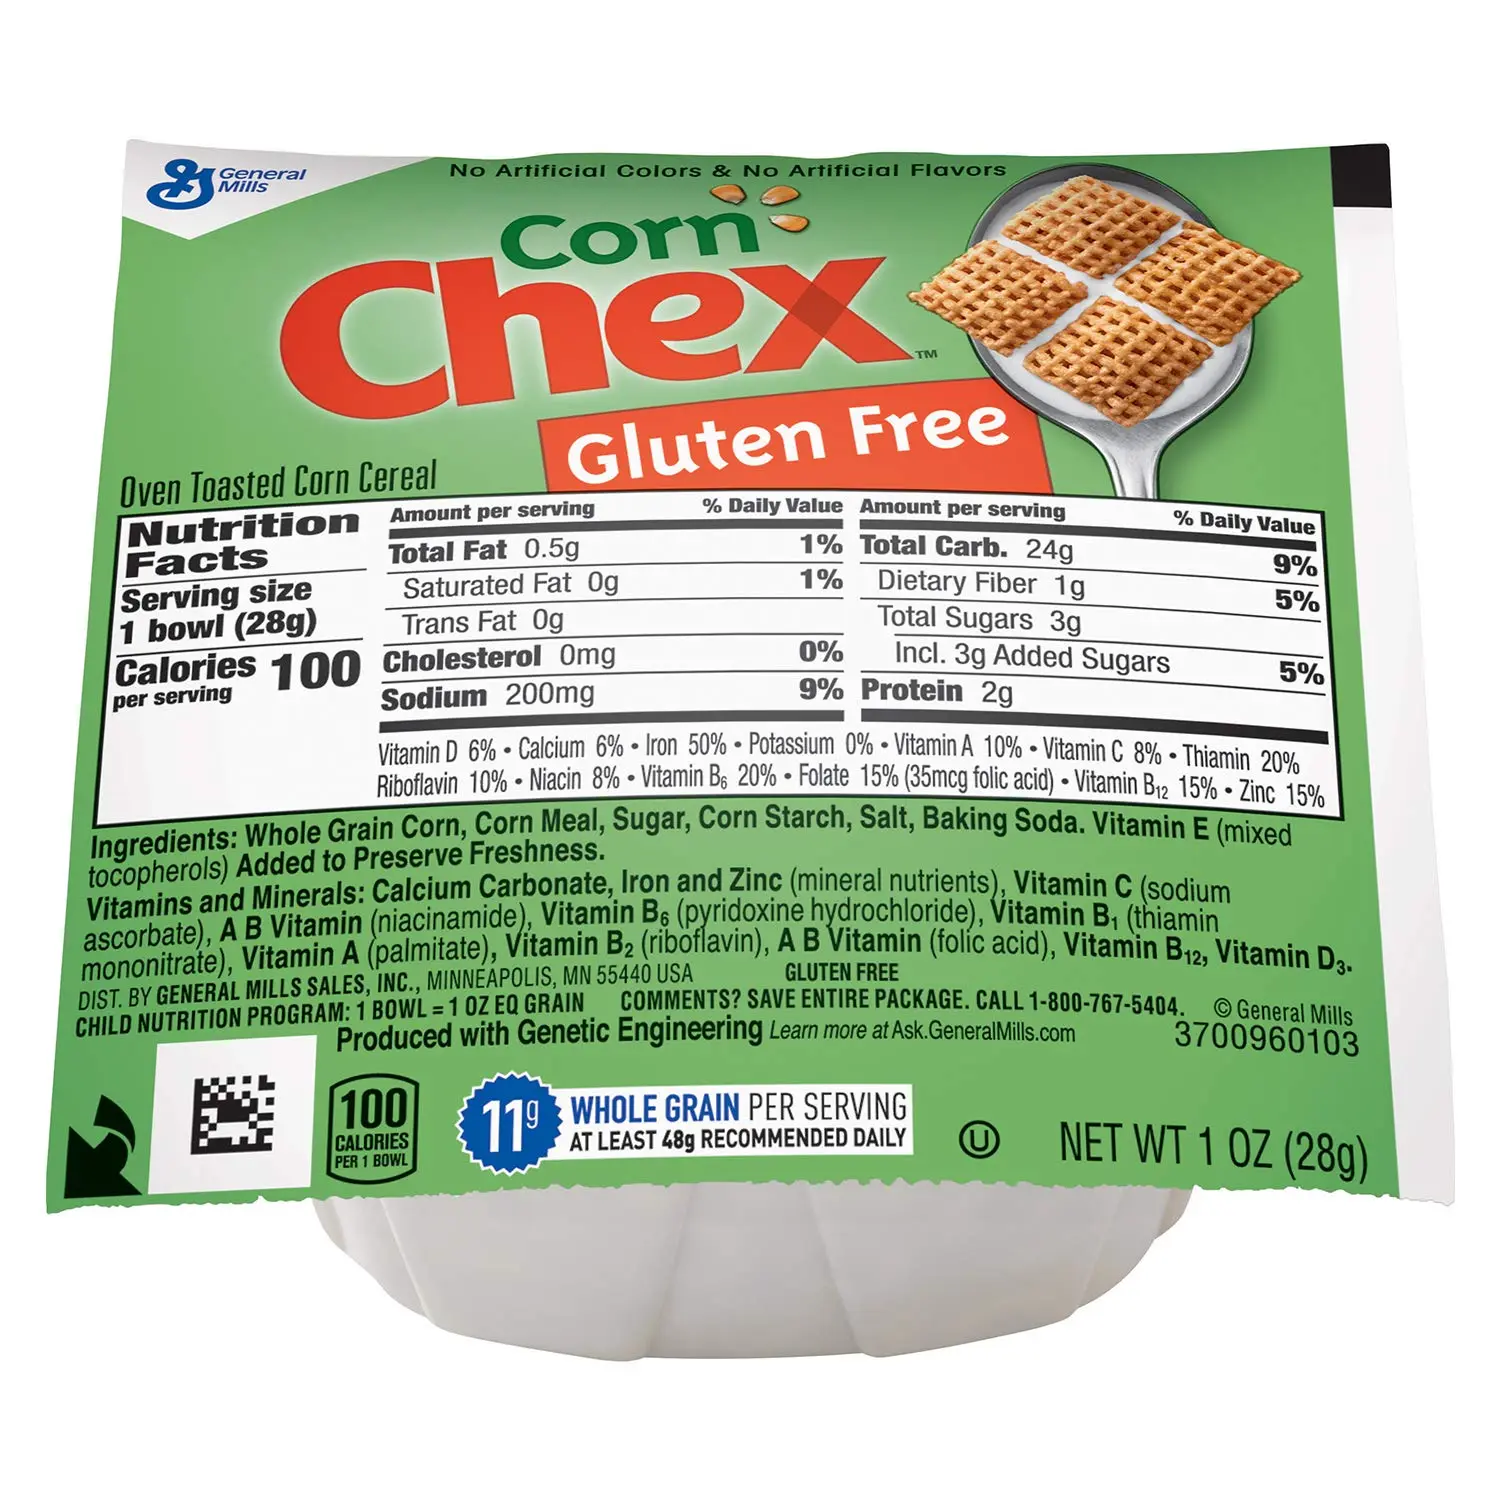 Chex Nutrition Facts